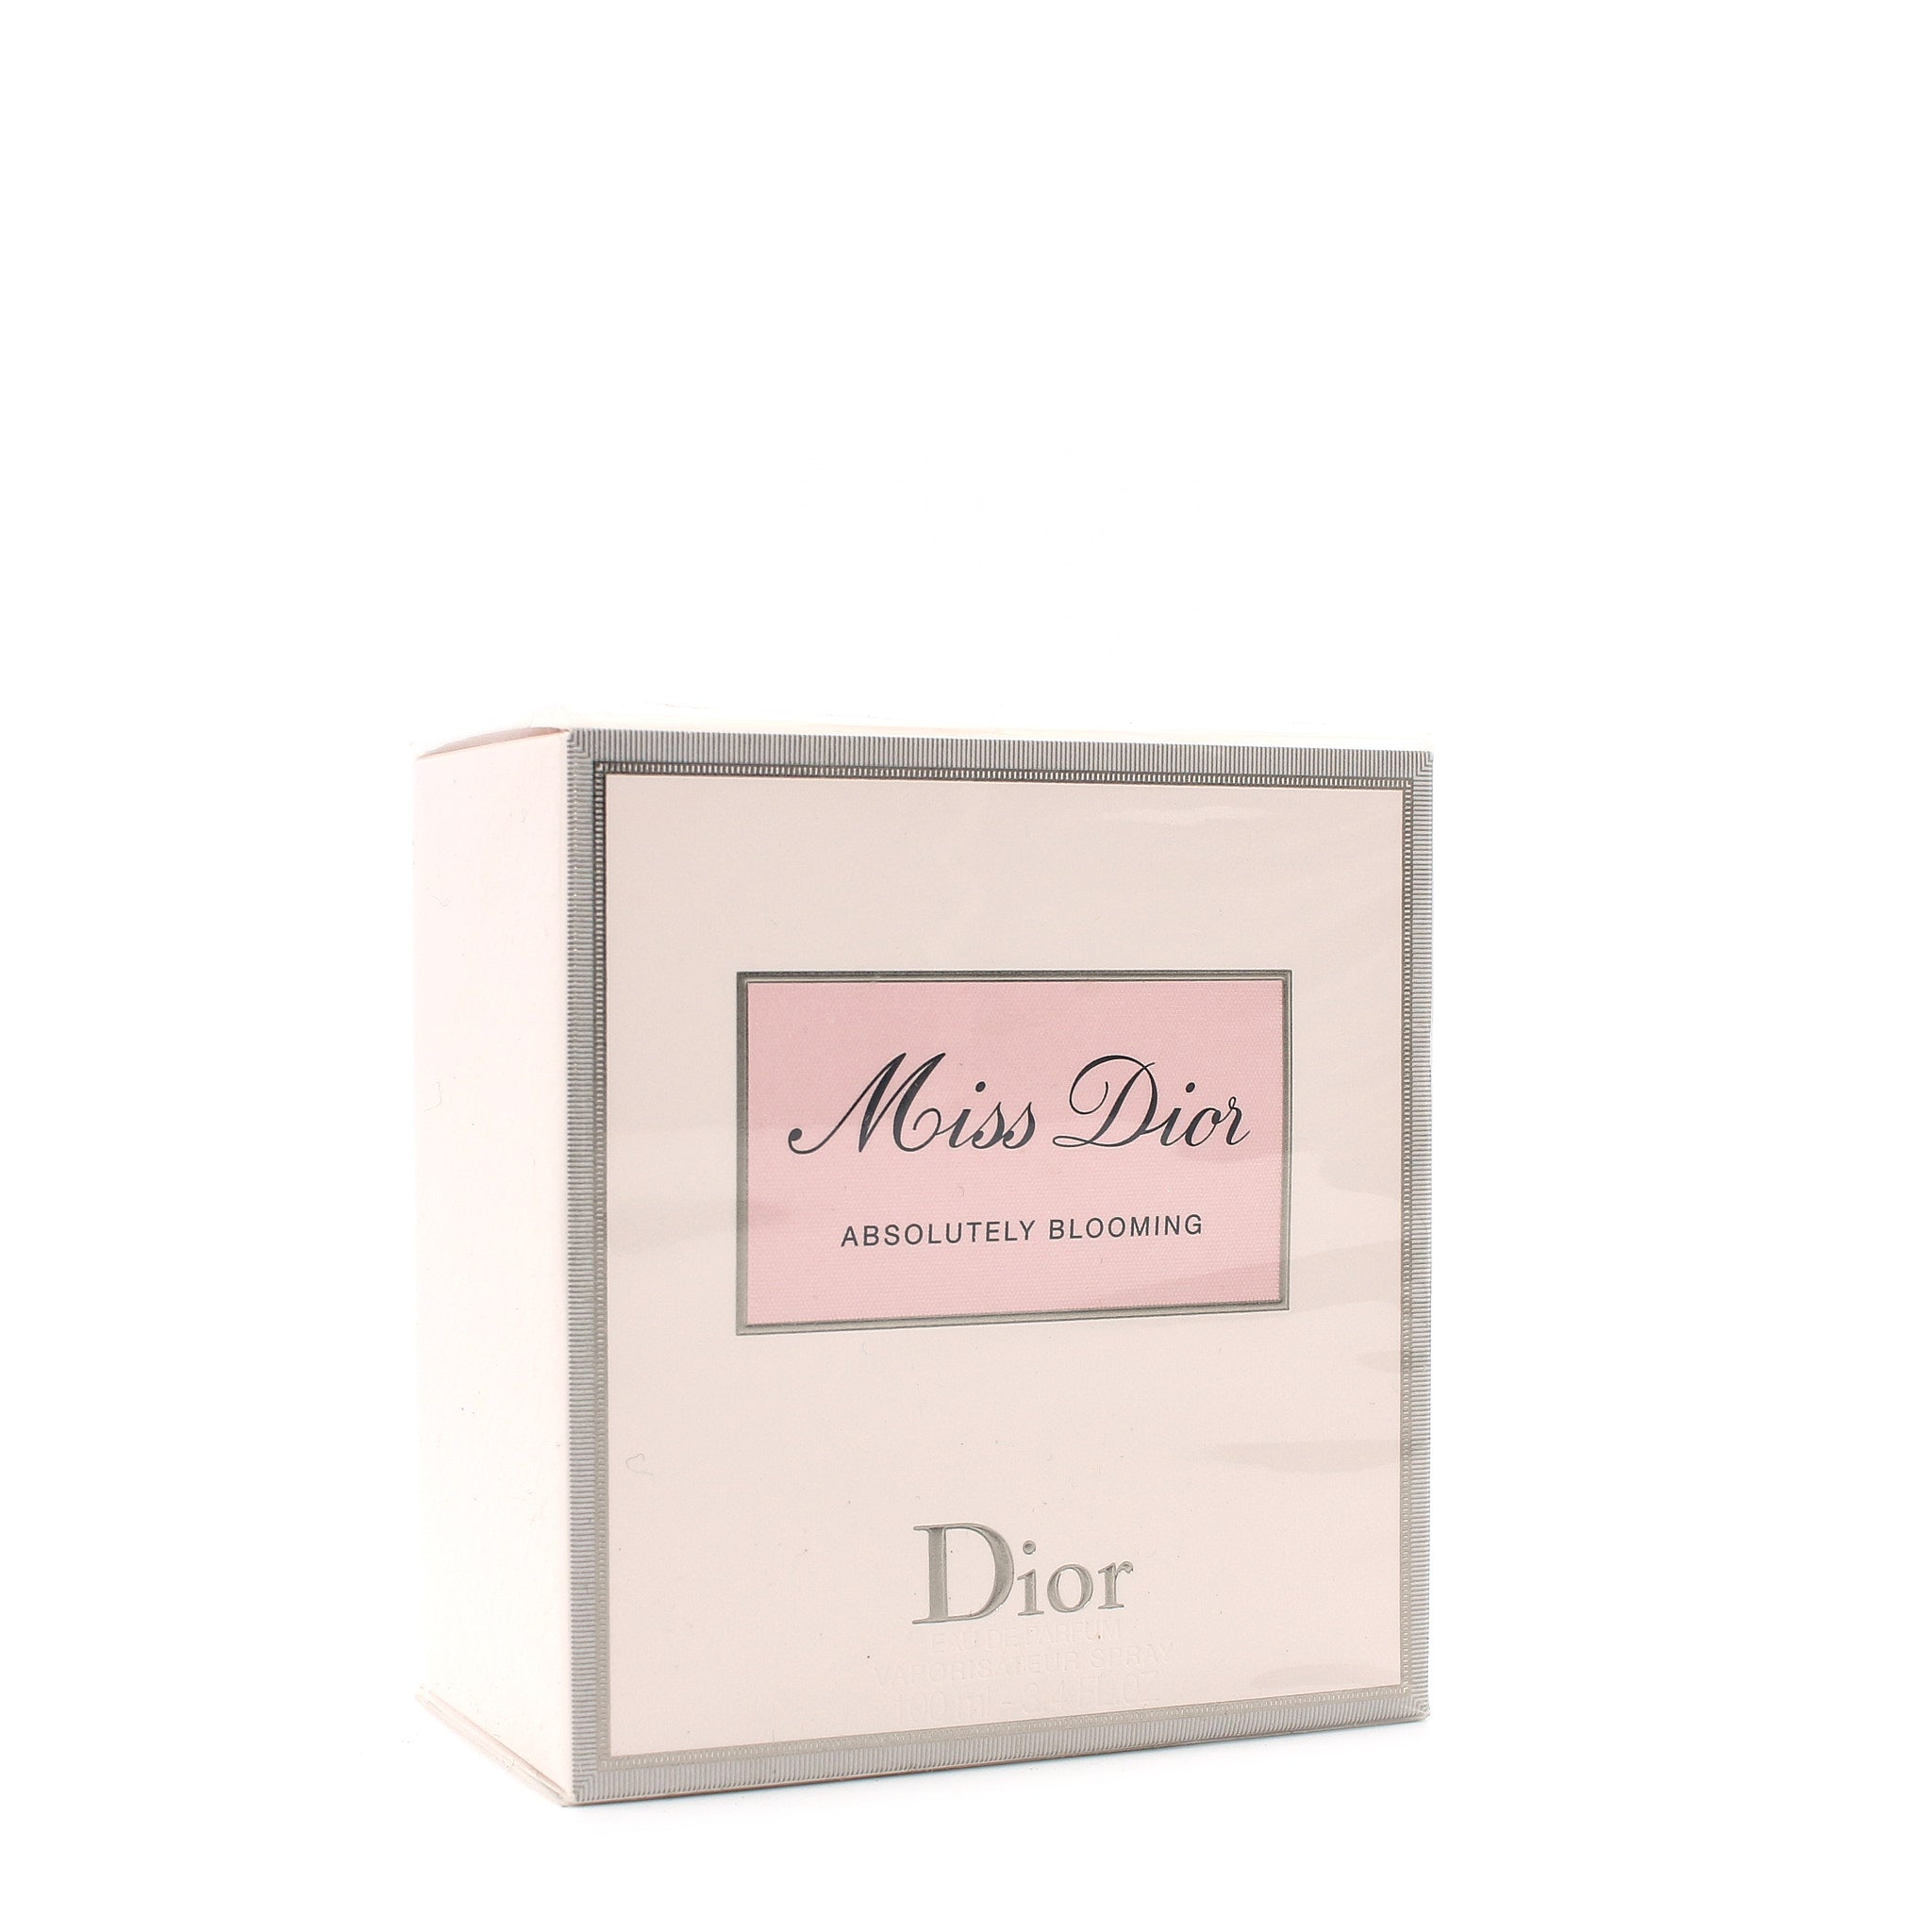 Christian Dior Hawaii Shopping Guide (Special Hawaii Pricing